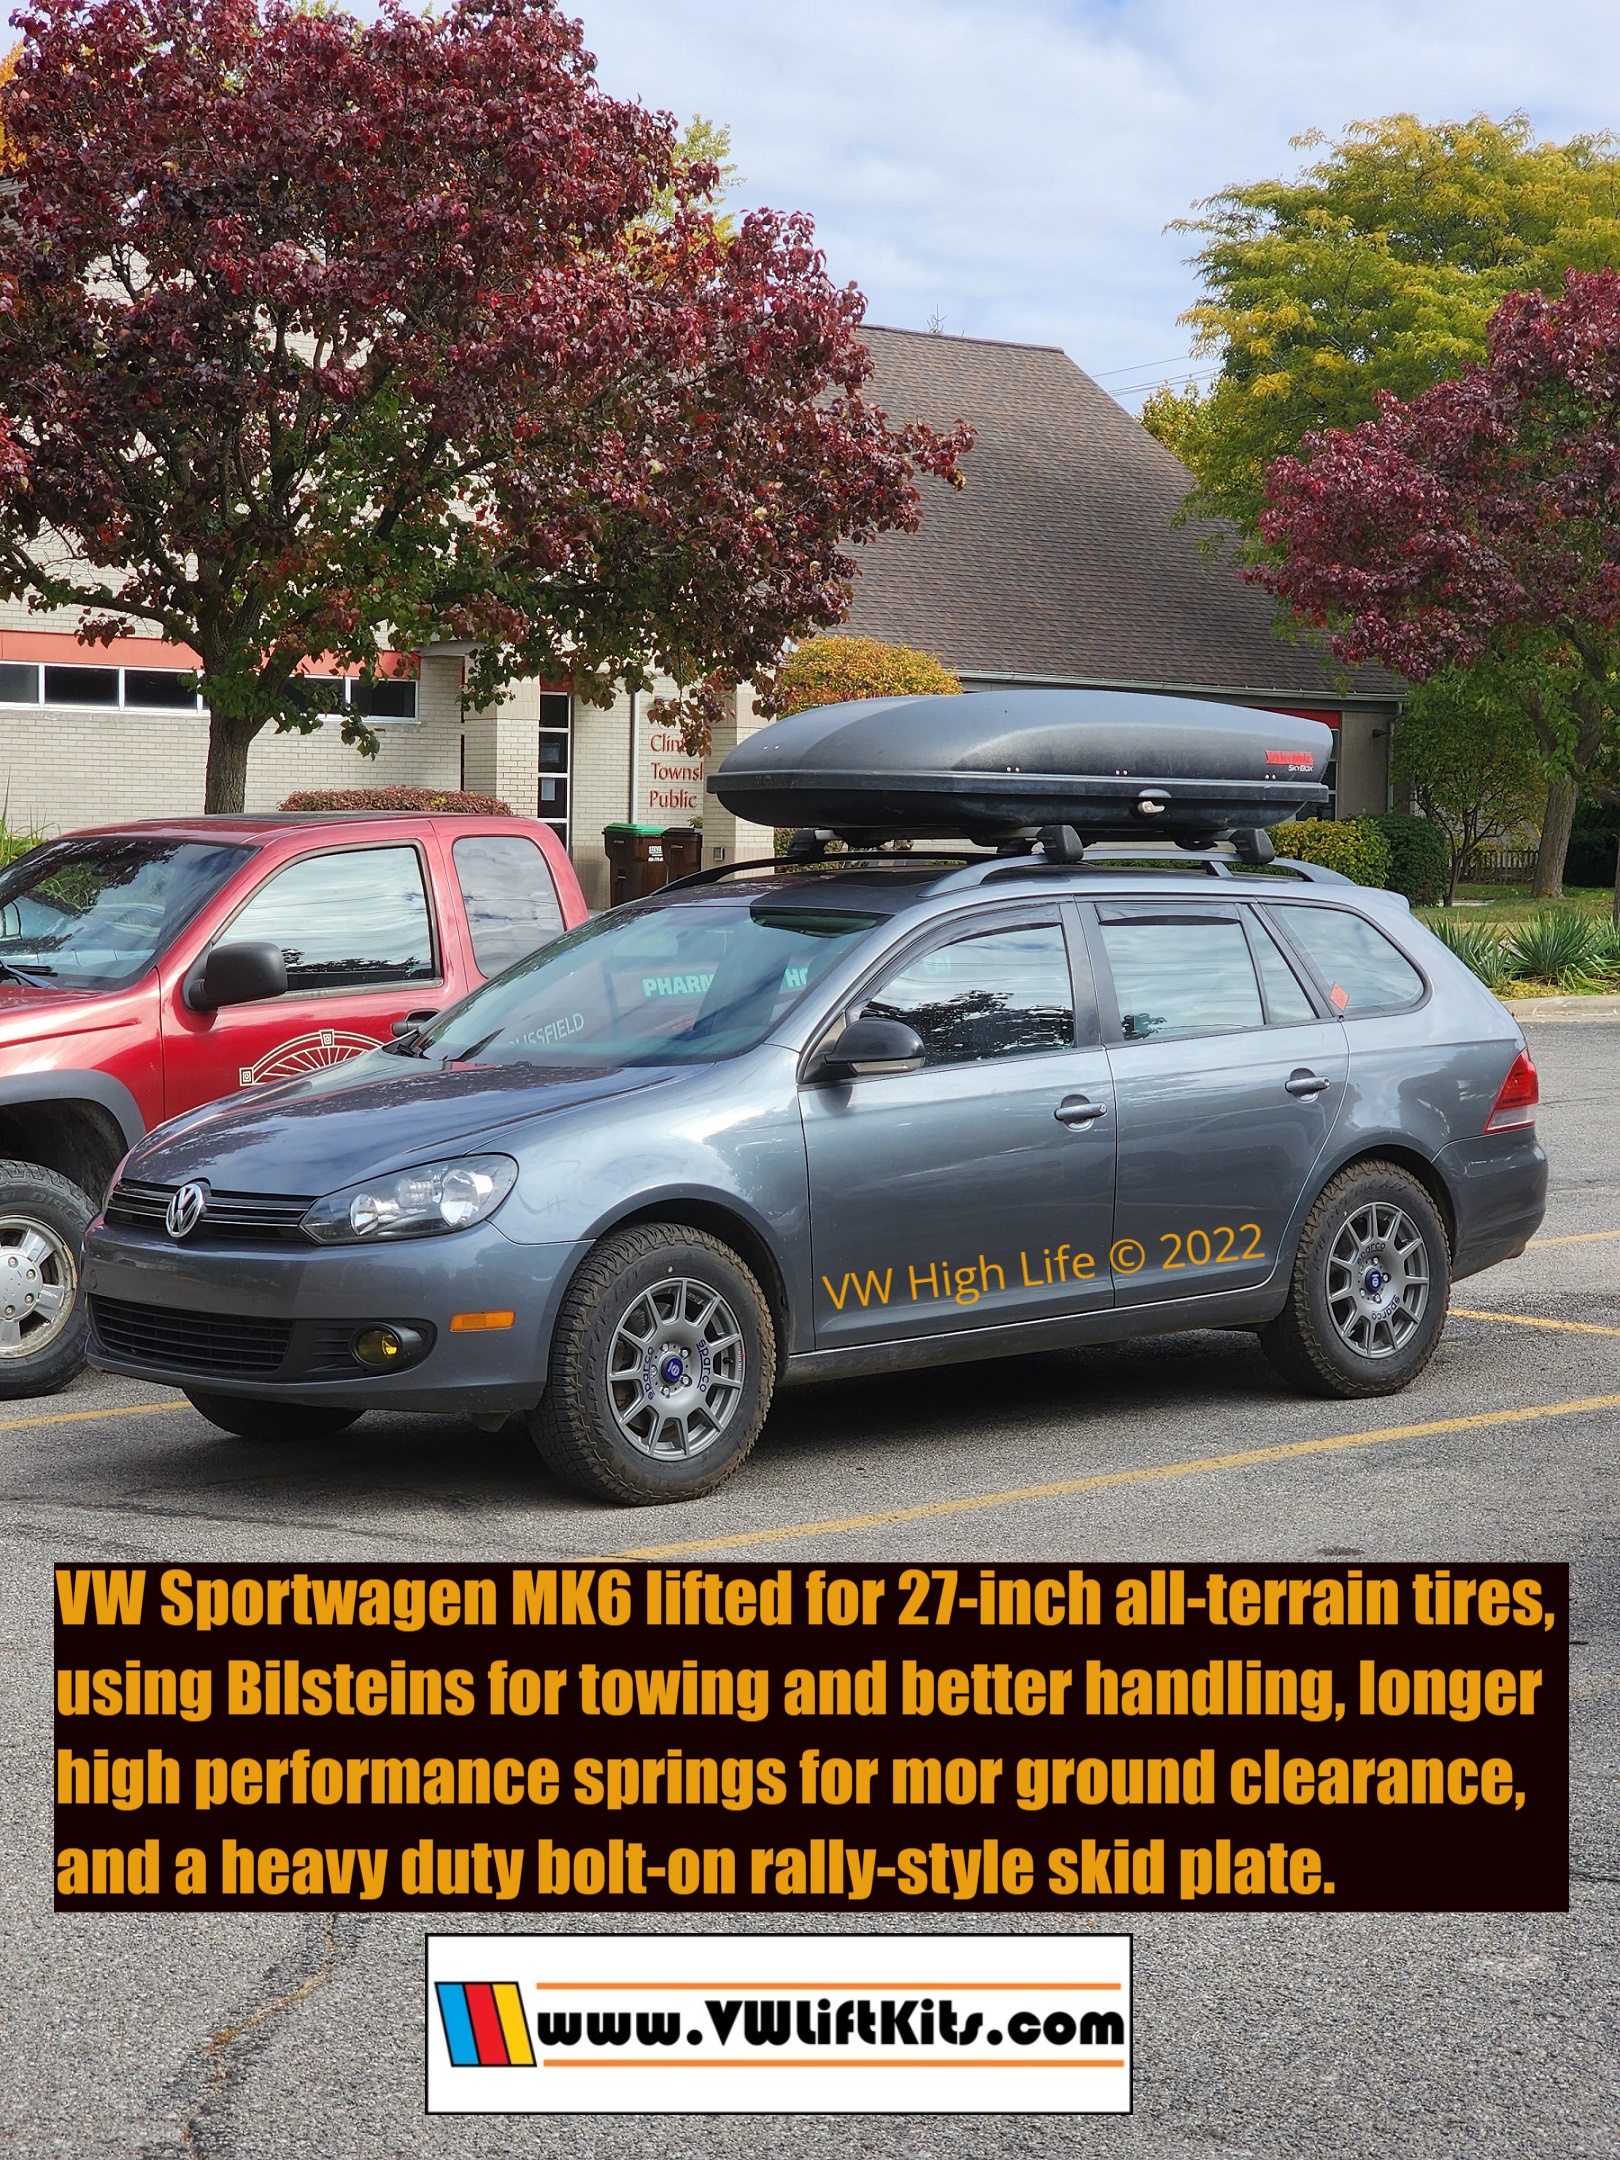 Joe lifted his Sportwagen with longer springs and bilsteins to tow his trailer and also added a skid plate